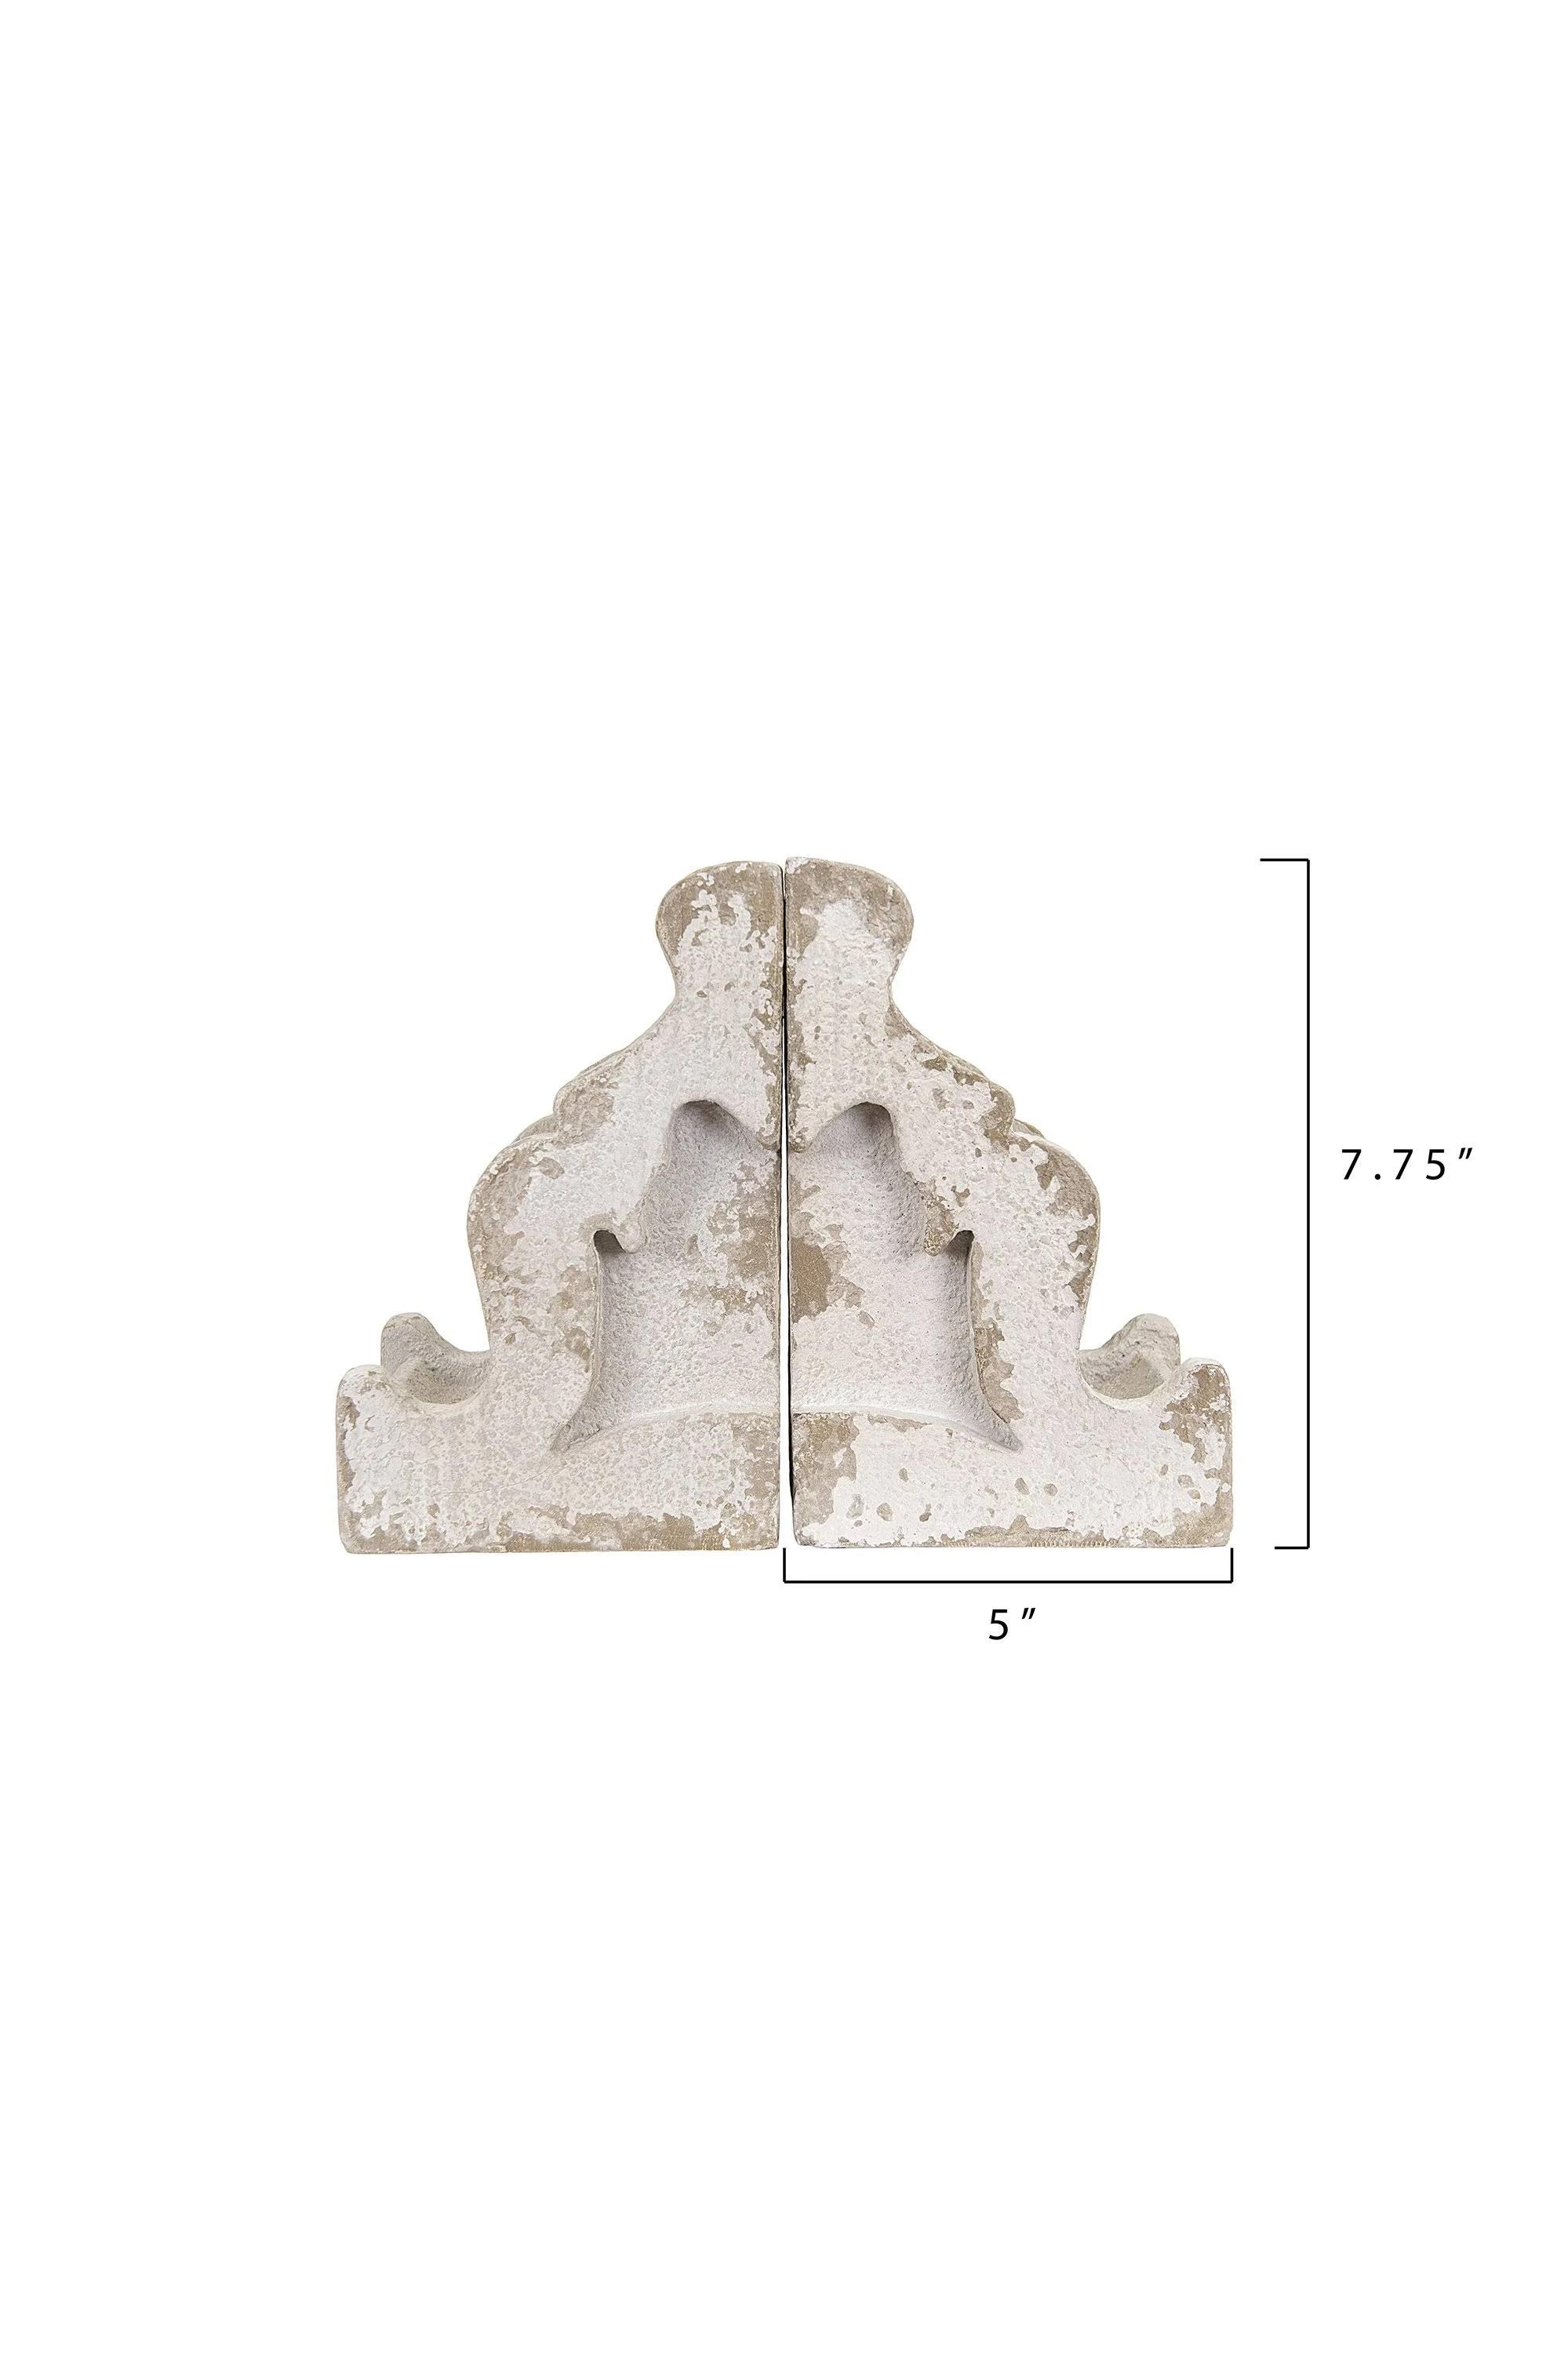 Distressed White Corbel Shaped Bookends (Set of 2 Pieces) - Image 2